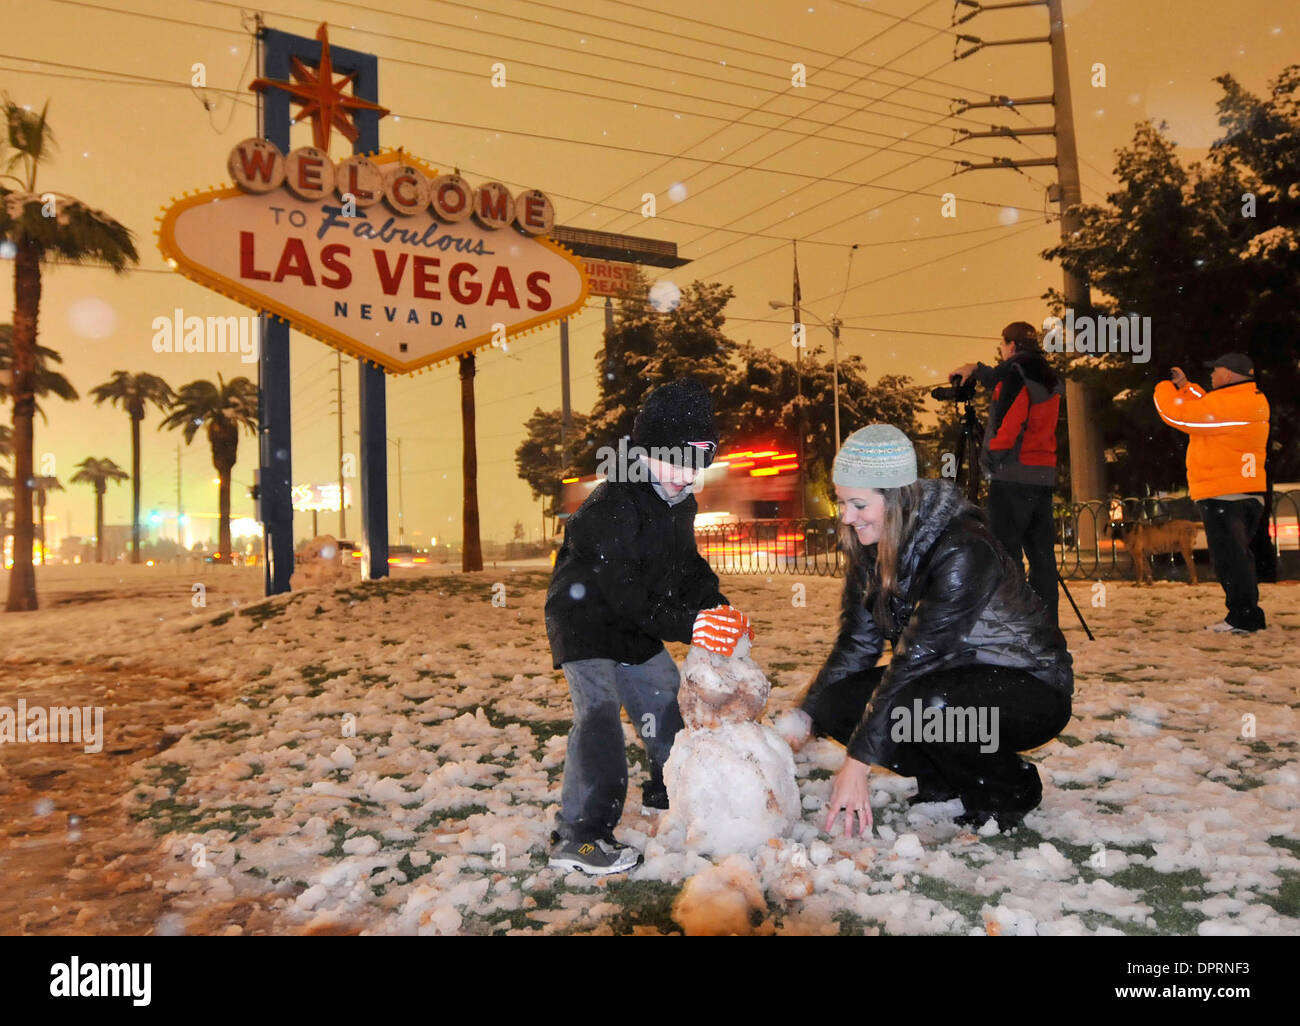 Dec 18, 2008 - Las Vegas, Nevada, USA - LANDEN SEVERSON, 6 with his mom,  CARLY WARD, construct a snowman at the foot of the welcome to Las Vegas  sign along the